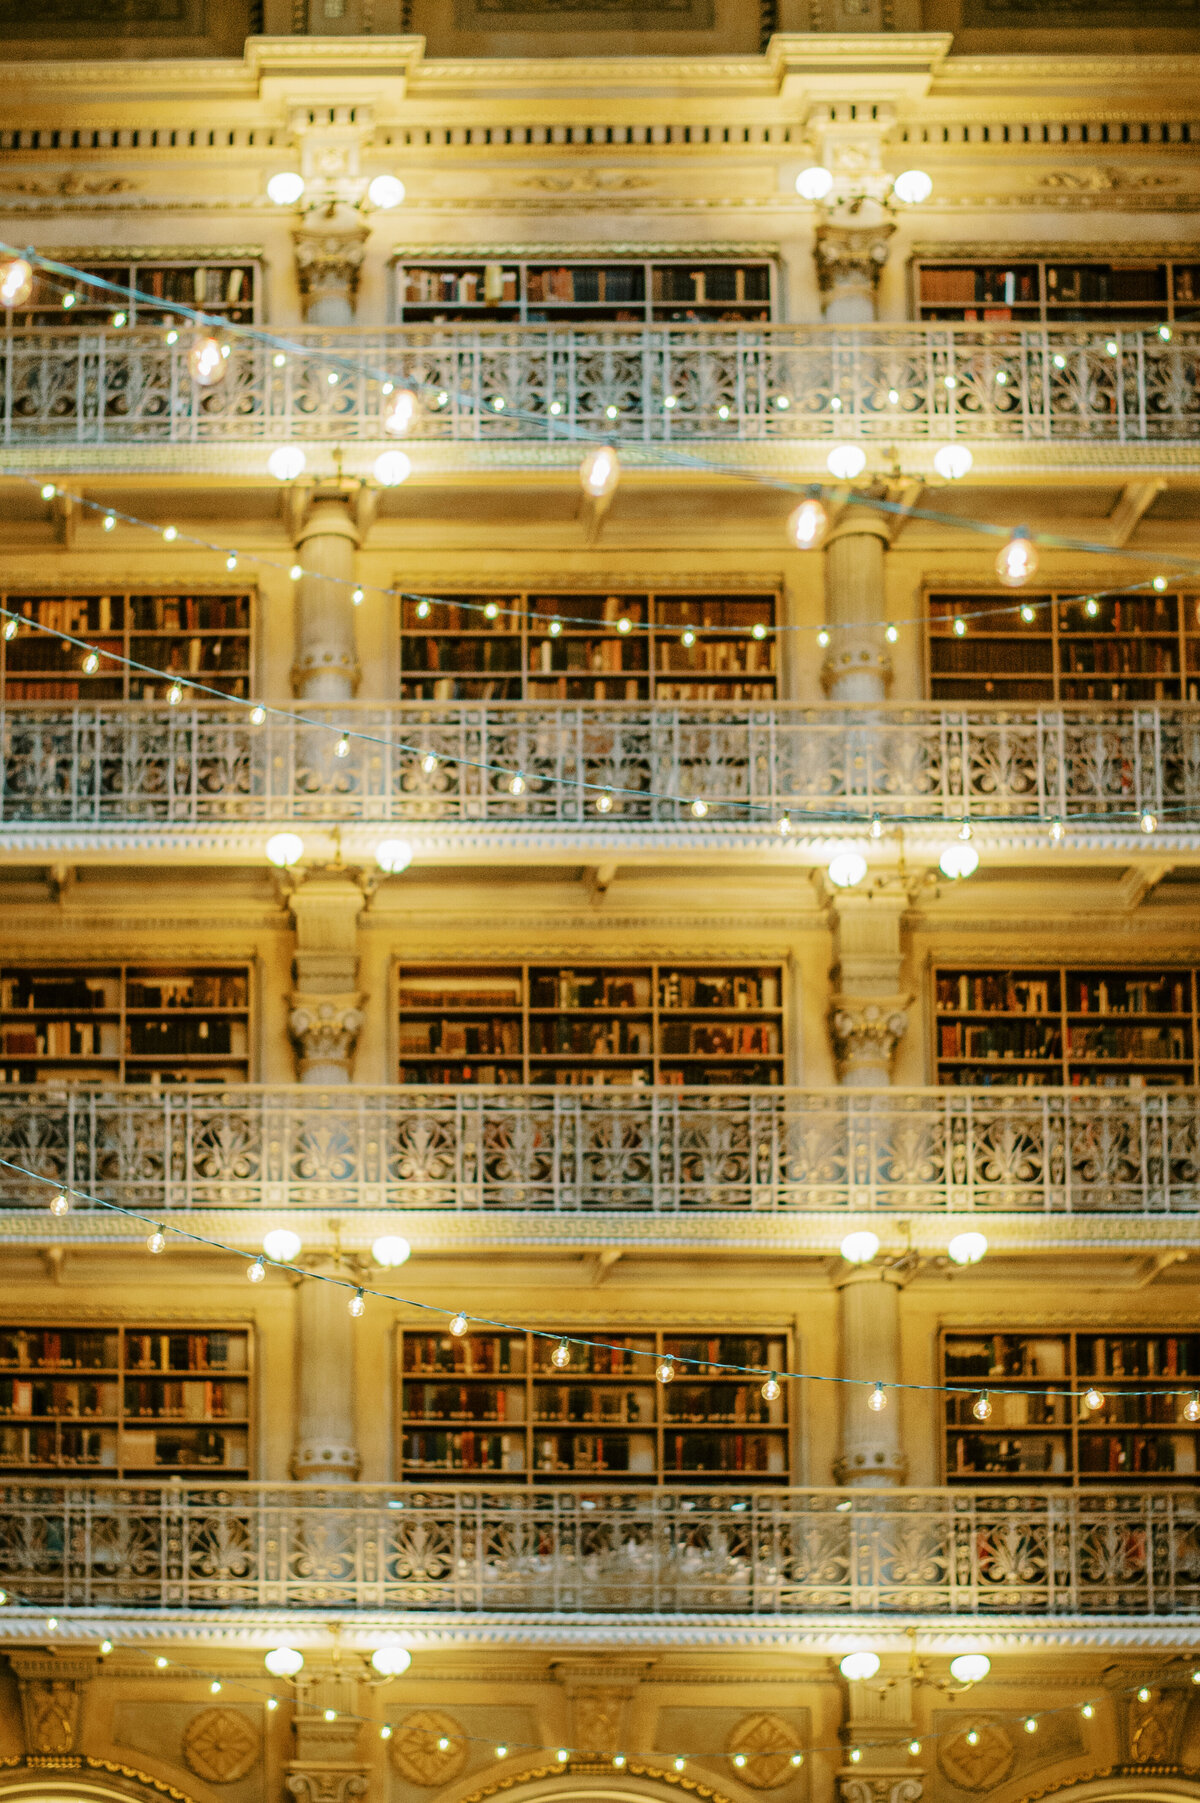 George-Peabody-Library-Engagement-Photos-4